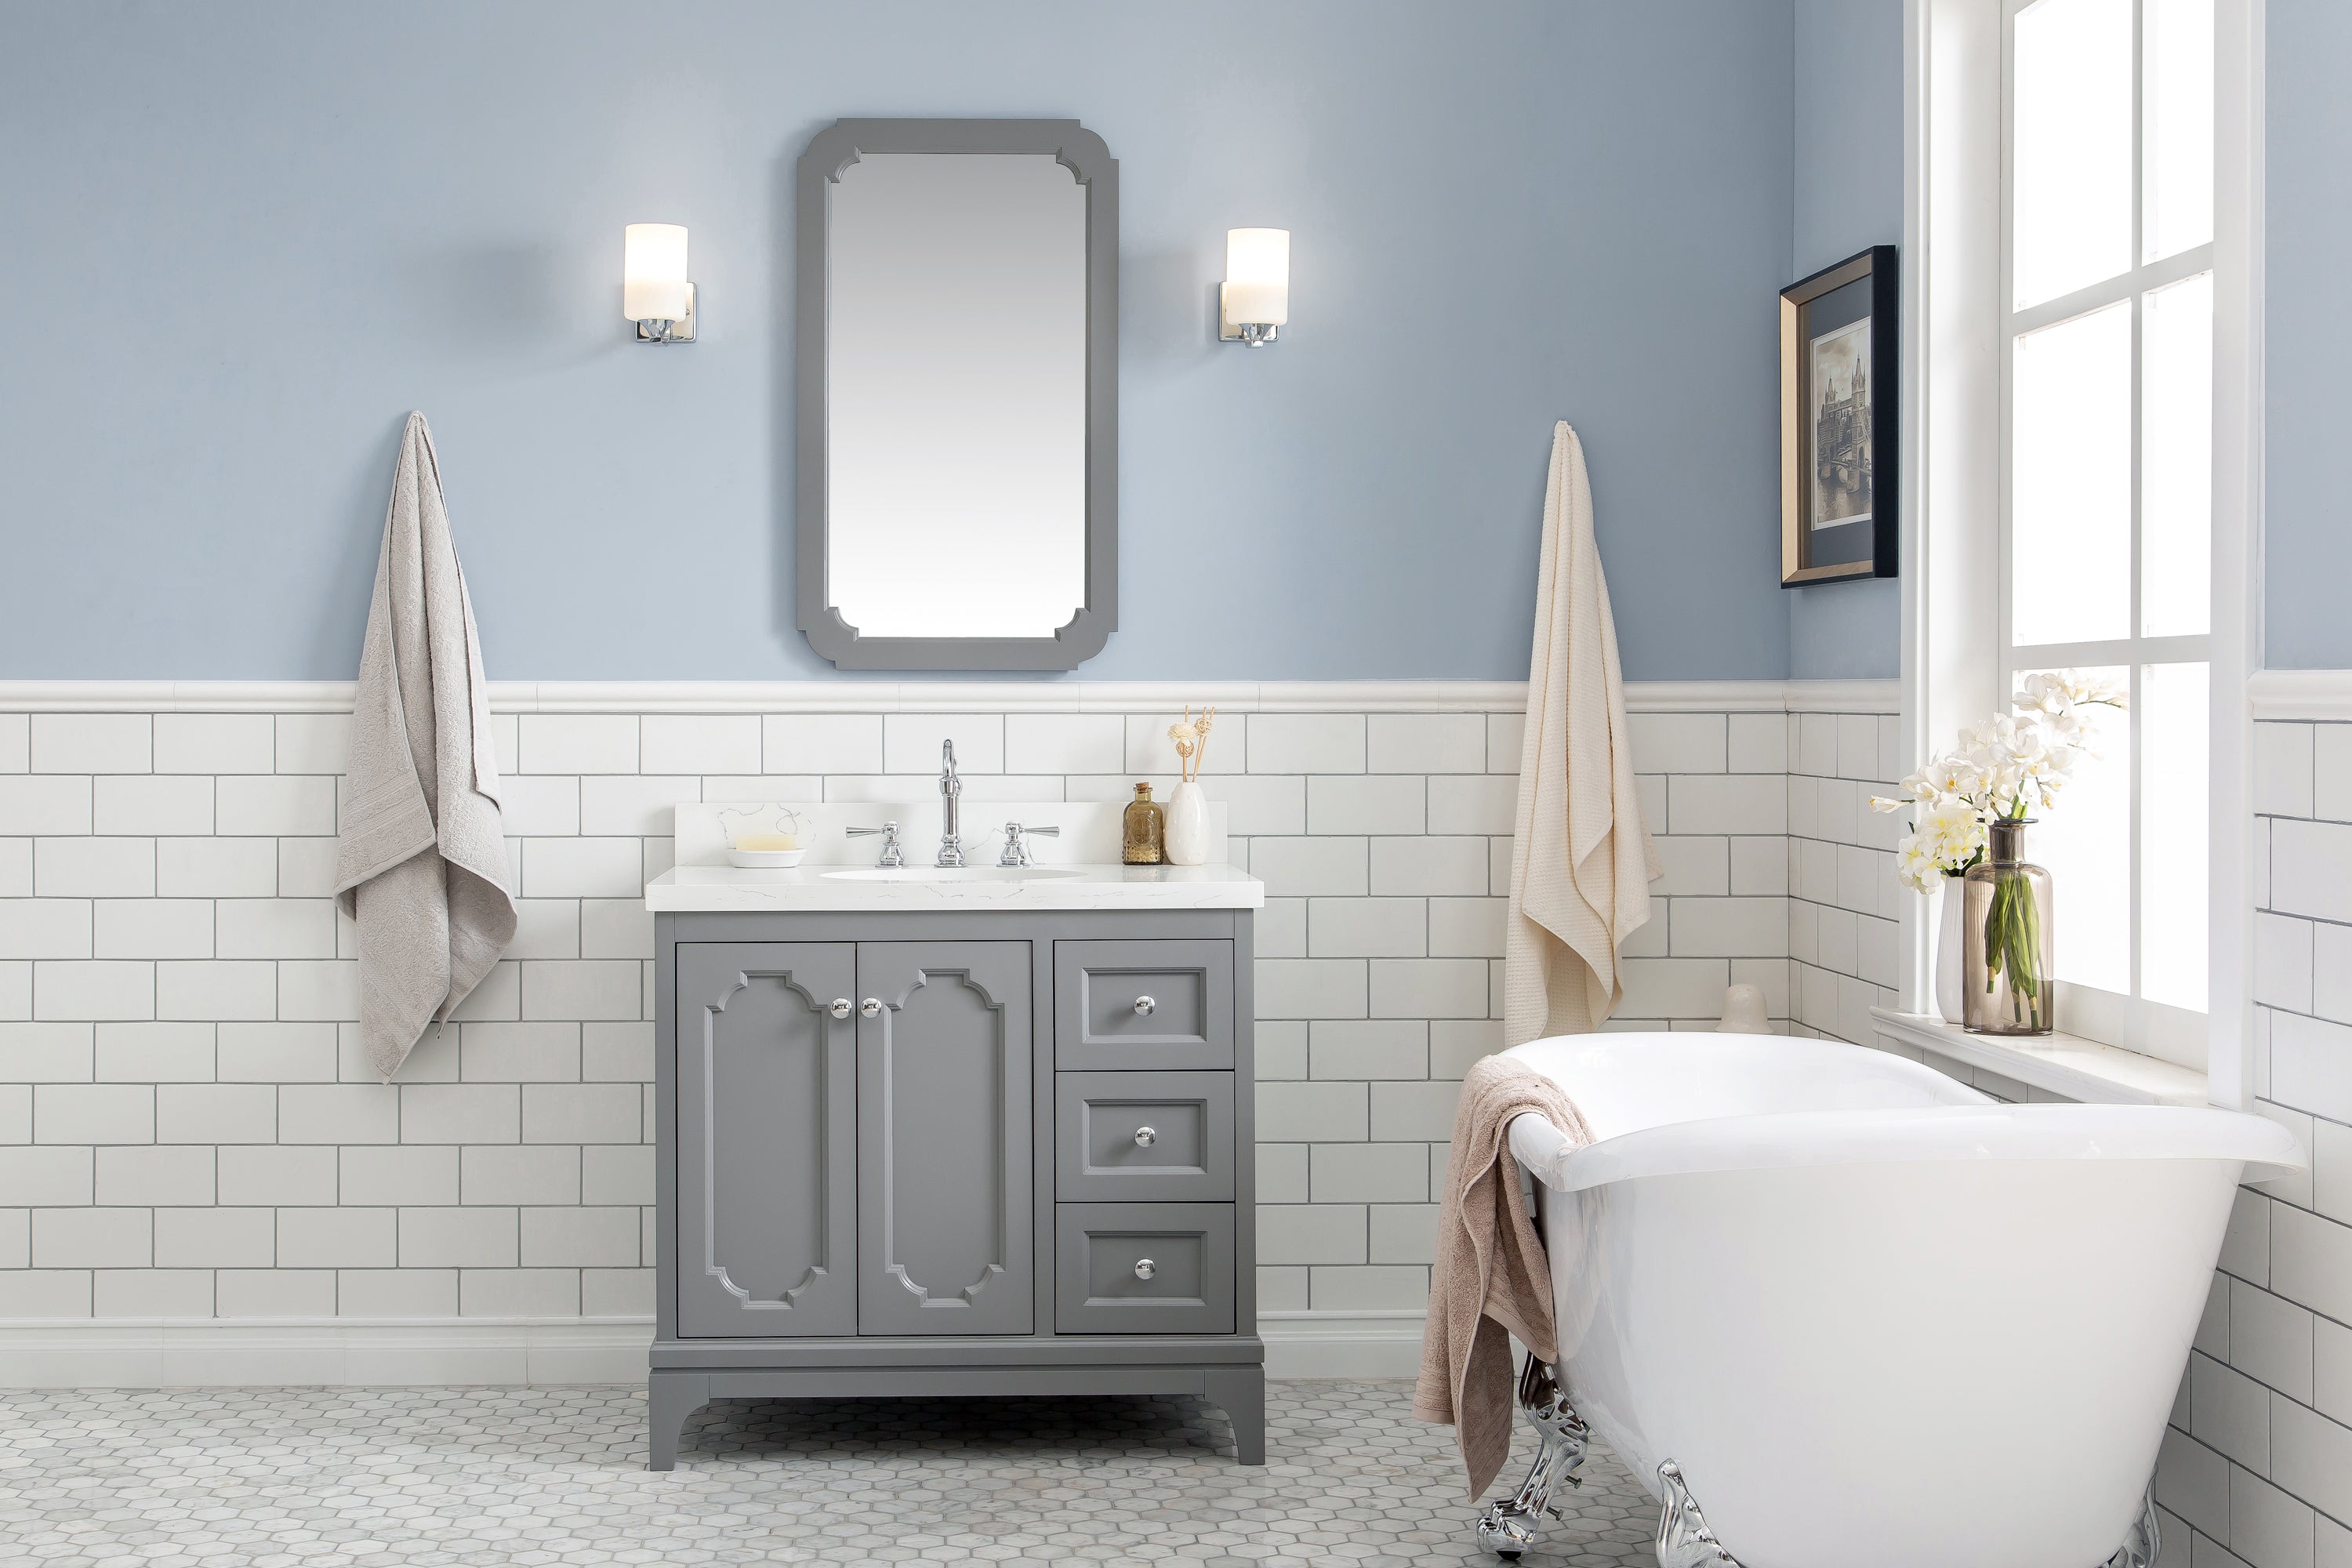 Water Creation | Queen 36-Inch Single Sink Quartz Carrara Vanity In Cashmere Grey With Matching Mirror(s) and F2-0012-01-TL Lavatory Faucet(s) | QU36QZ01CG-Q21TL1201